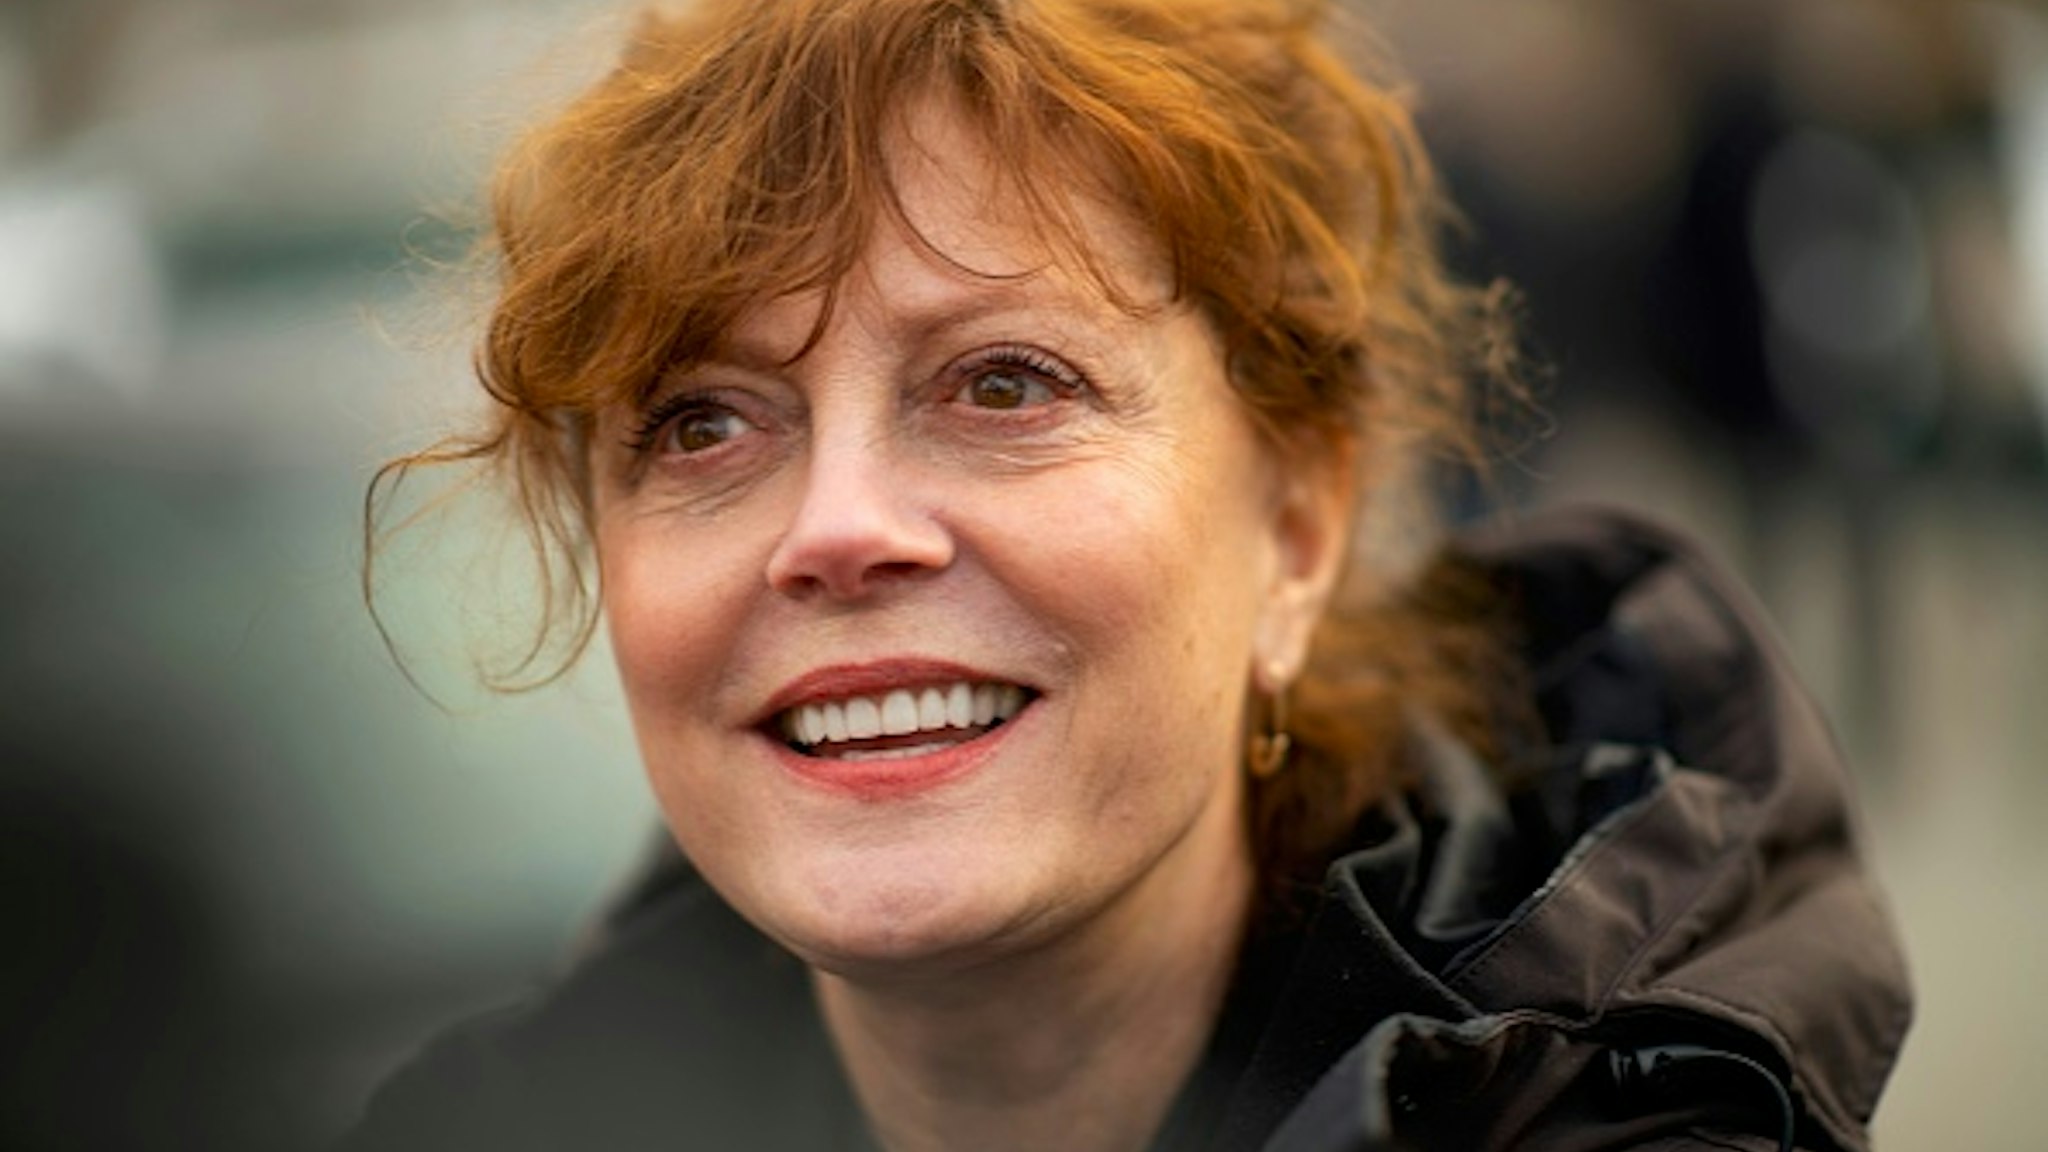 WATERLOO, IA - FEBRUARY 1: Actress Susan Sarandon, a supporter of Democratic Presidential candidate Bernie Sanders, greets local campaign volunteers after speaking during a field office event on February 1, 2020 in Waterloo, Iowa. On the penultimate day of campaign before the Iowa Caucus, Democratic Presidential candidates and their supporters are traversing the state to greet prospective voters.